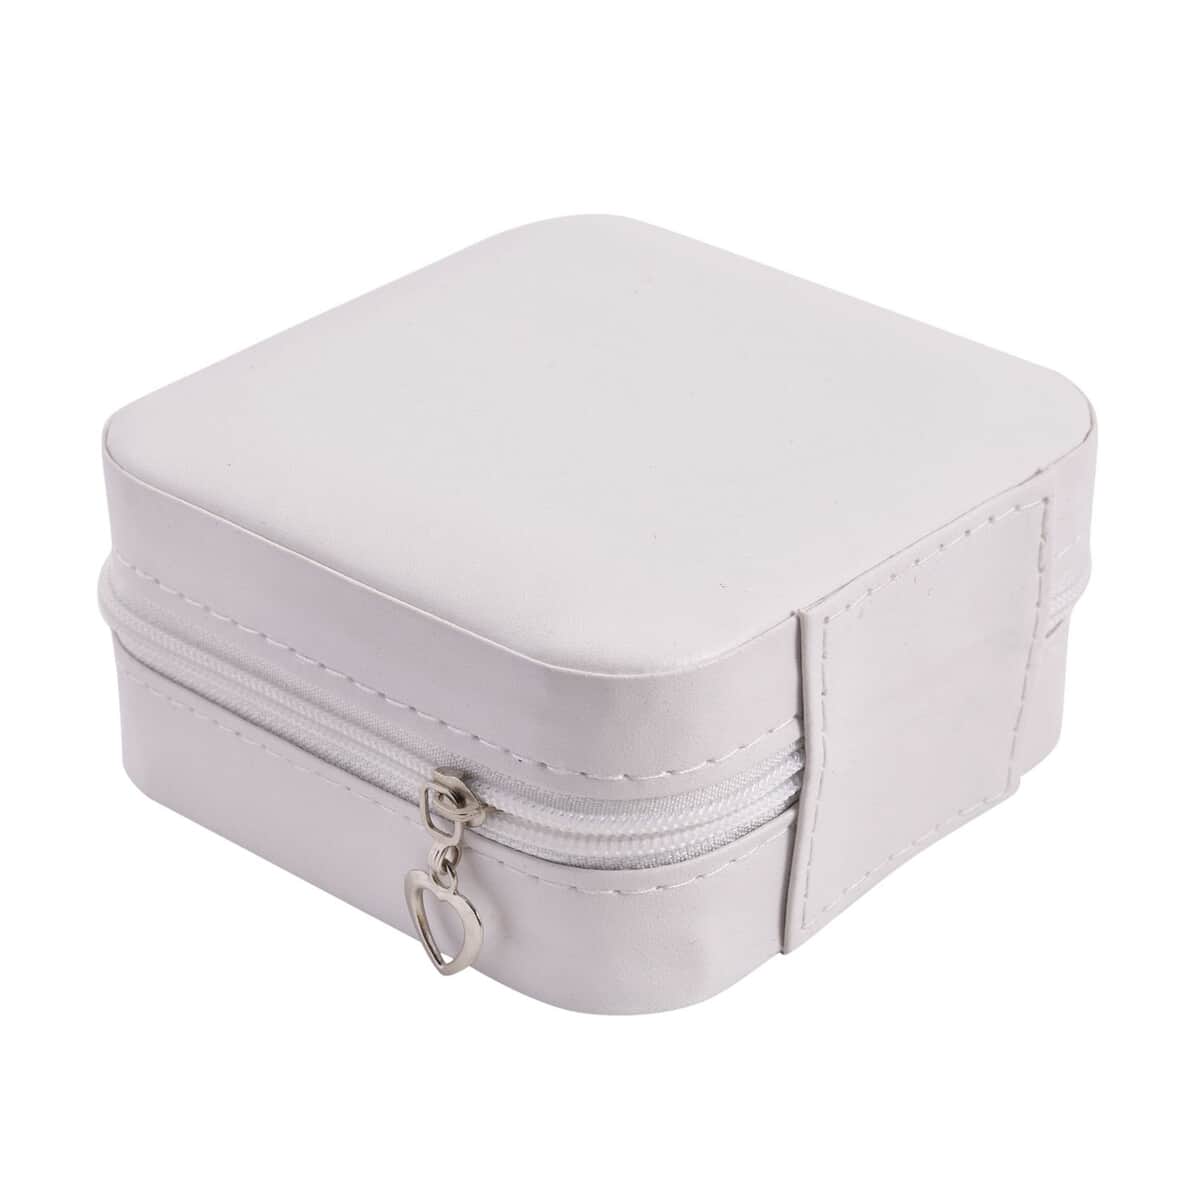 White Faux Leather Small, portable, Travel Jewelry Organizer Storage Box With Zipper For Stud Earrings, Rings, Necklaces, Bracelets image number 4